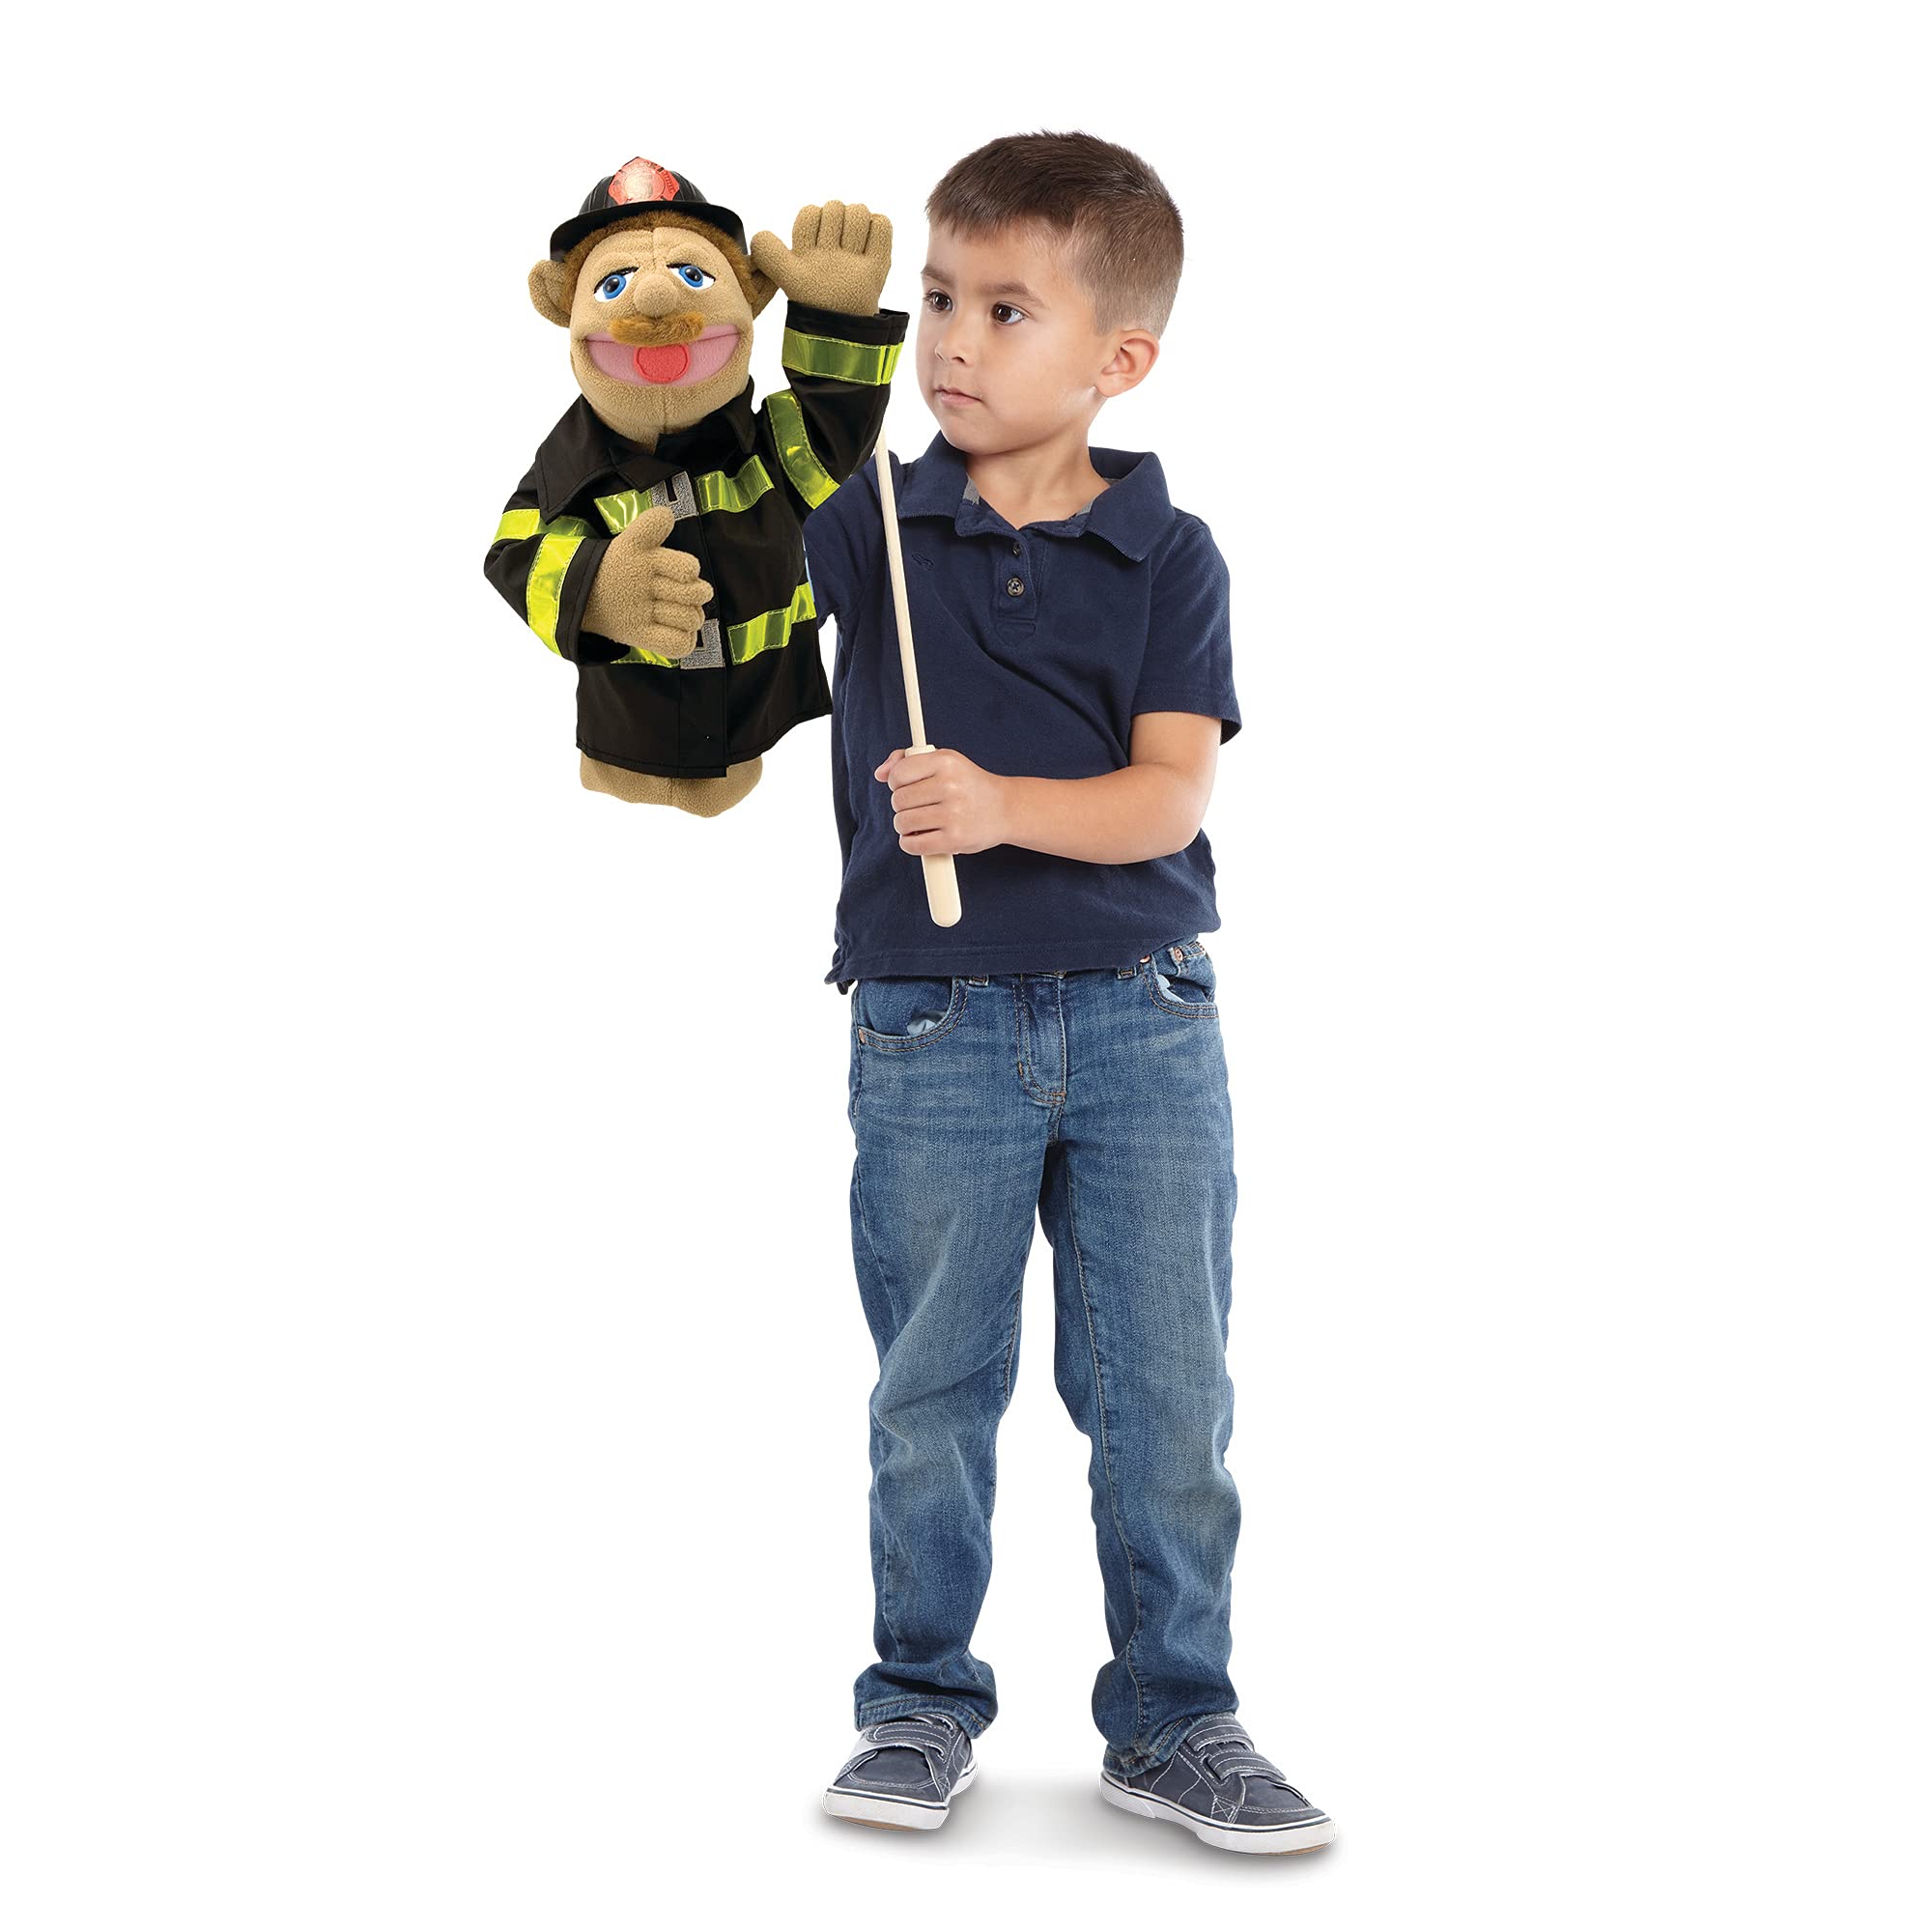 Melissa & Doug Rescue Puppet Set - Police Officer and Firefighter - Soft, Plush Puppets For Kids Ages 3+